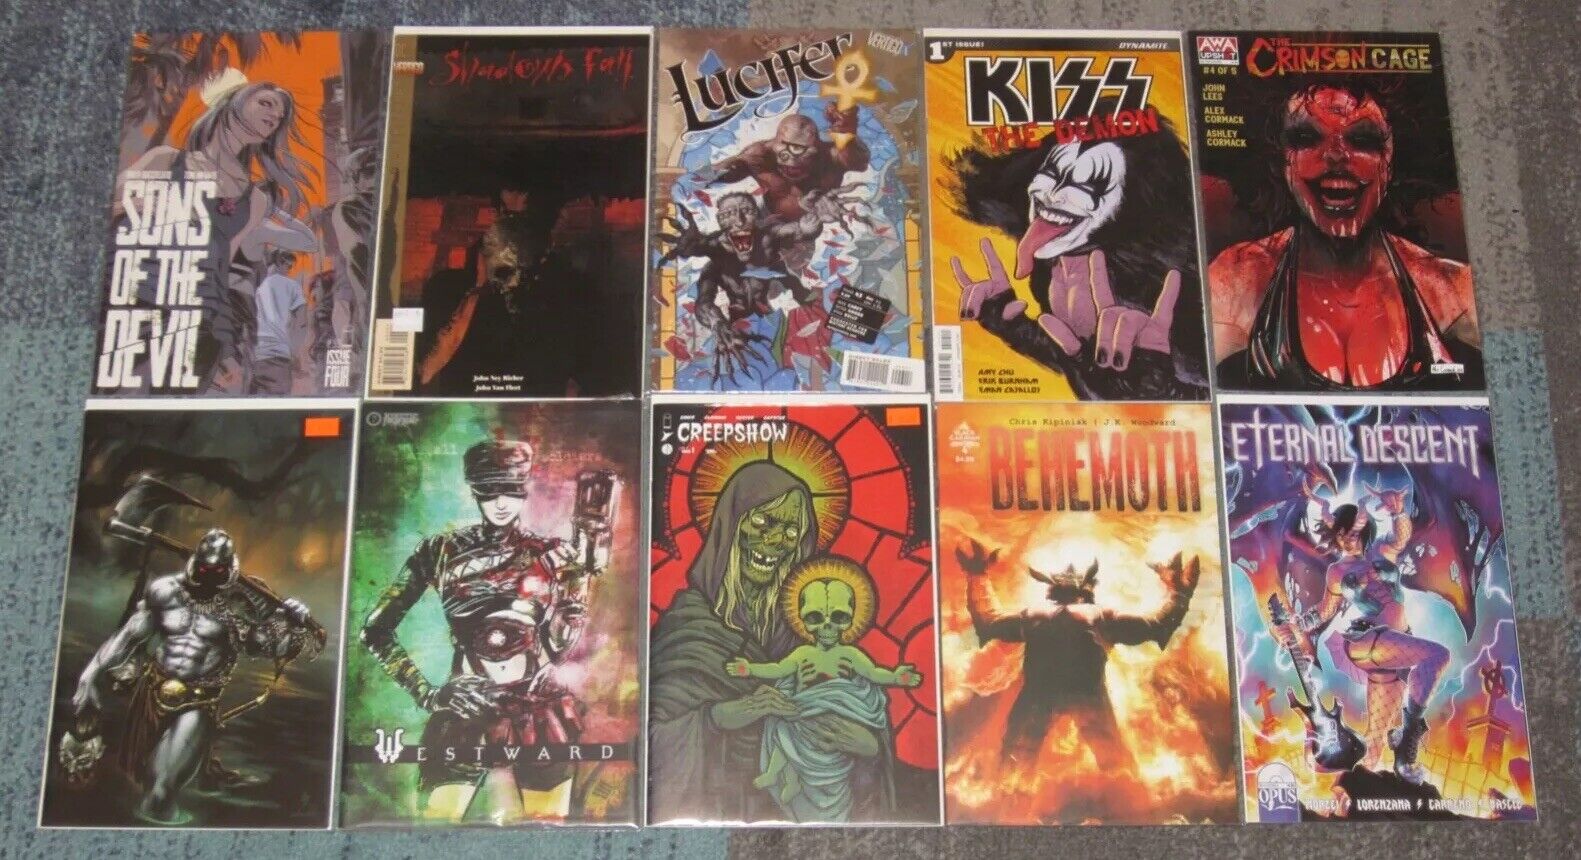 HUGE LOT OF 40 HEAVY METAL RELATED COMIC BOOKS - FOR METALHEADS HORROR/FANTASY